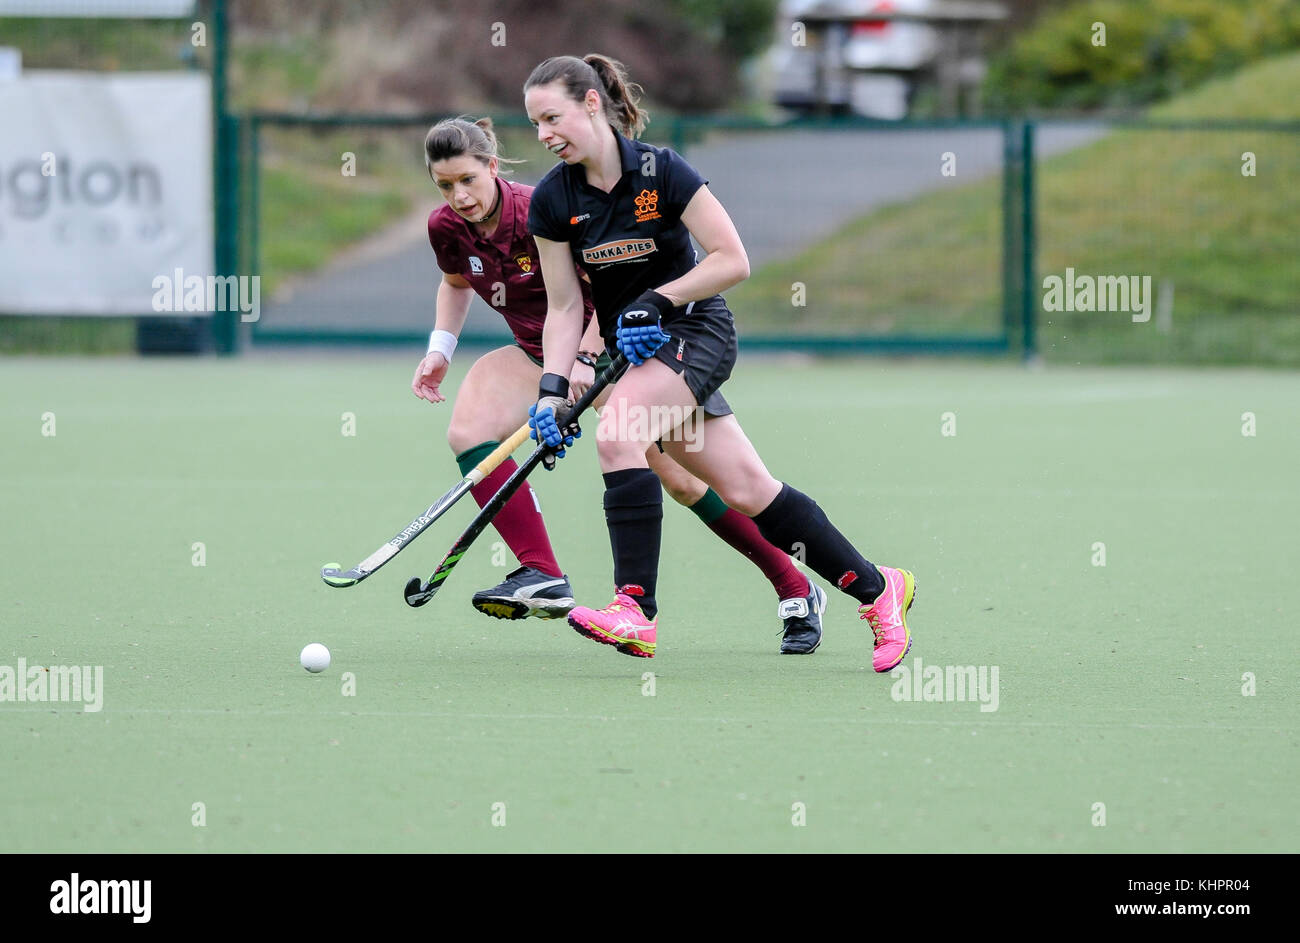 Two female field hockey players competing for the ball Stock Photo